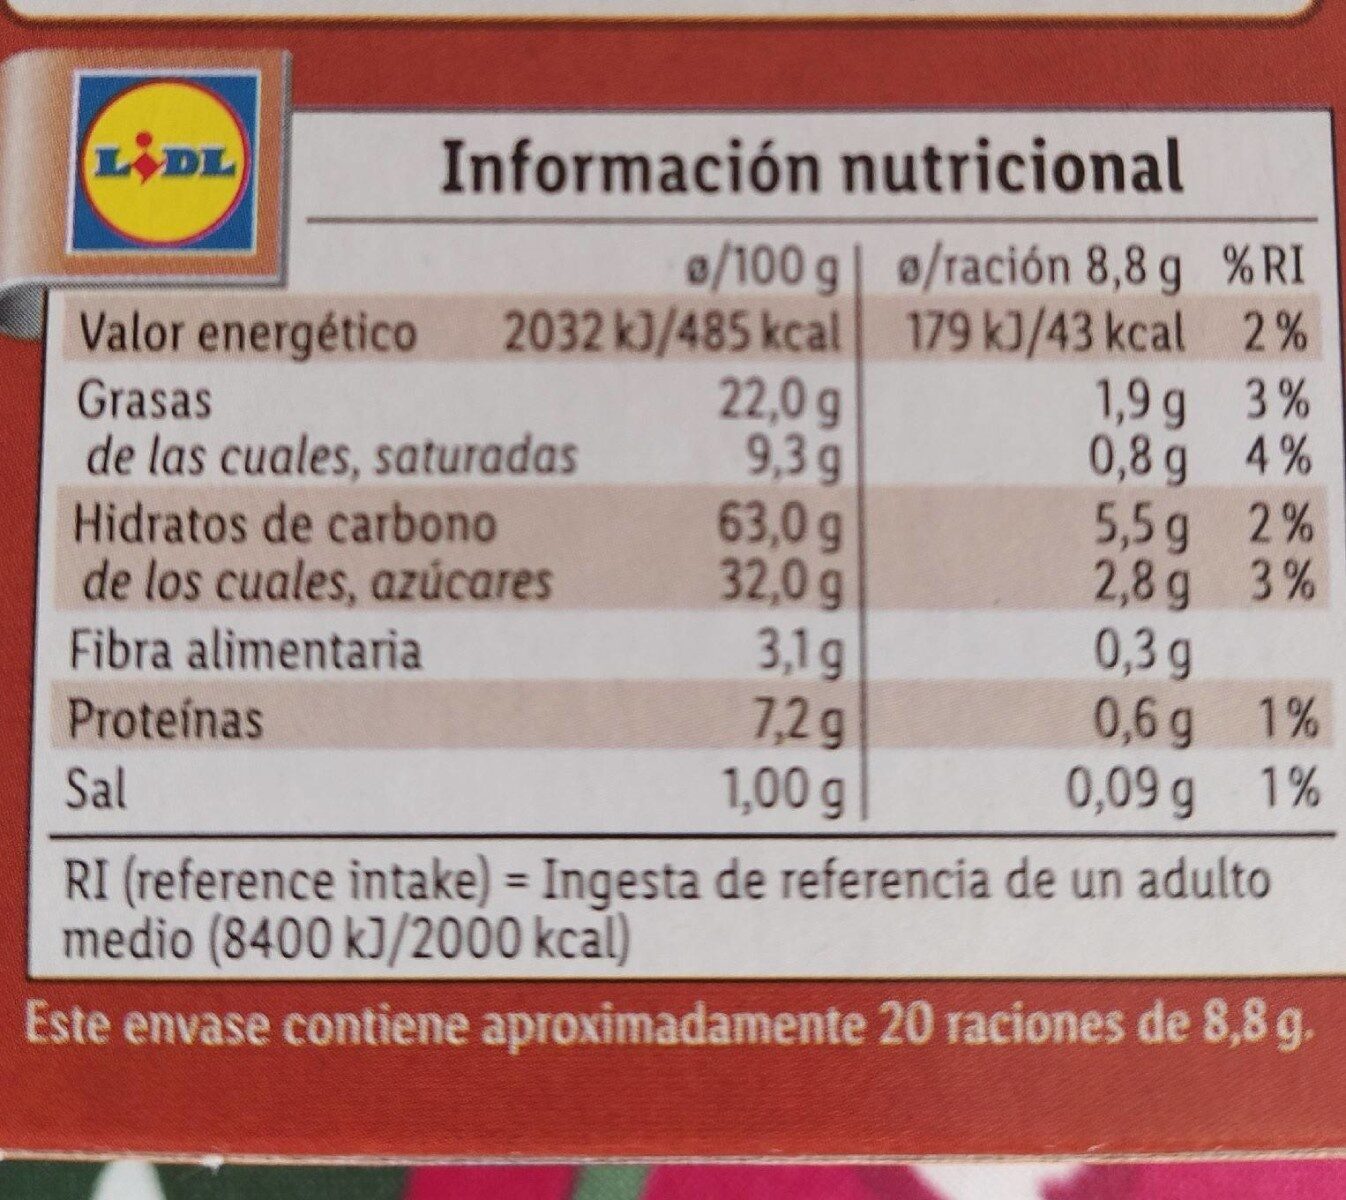 Digestive Finas chocolate con leche - Nutrition facts - es